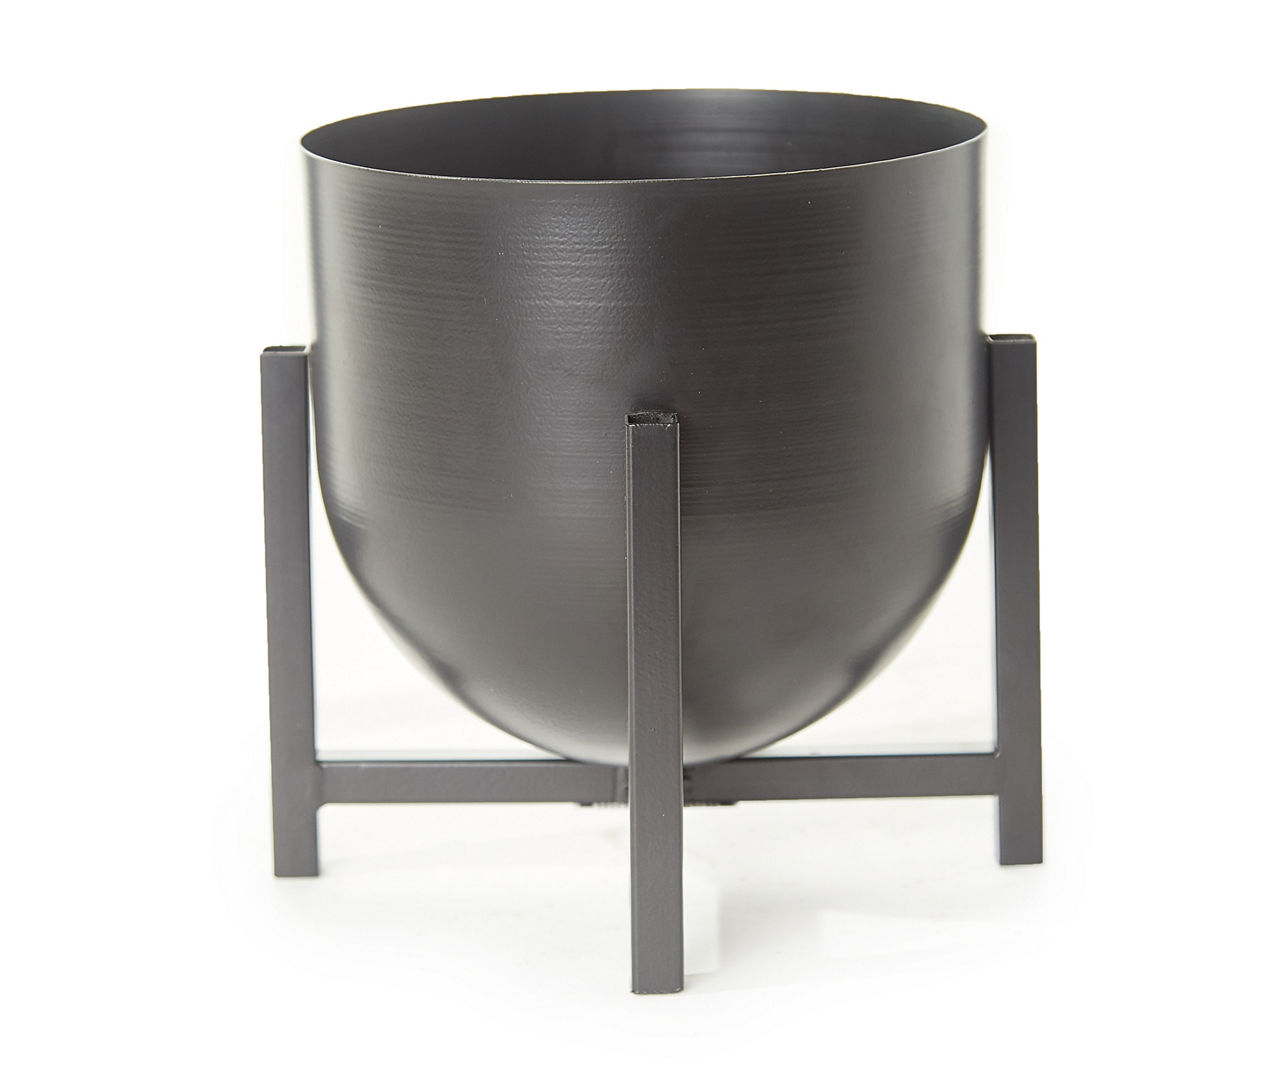 8.25IN TALL BLK METAL PLANTER W STAND